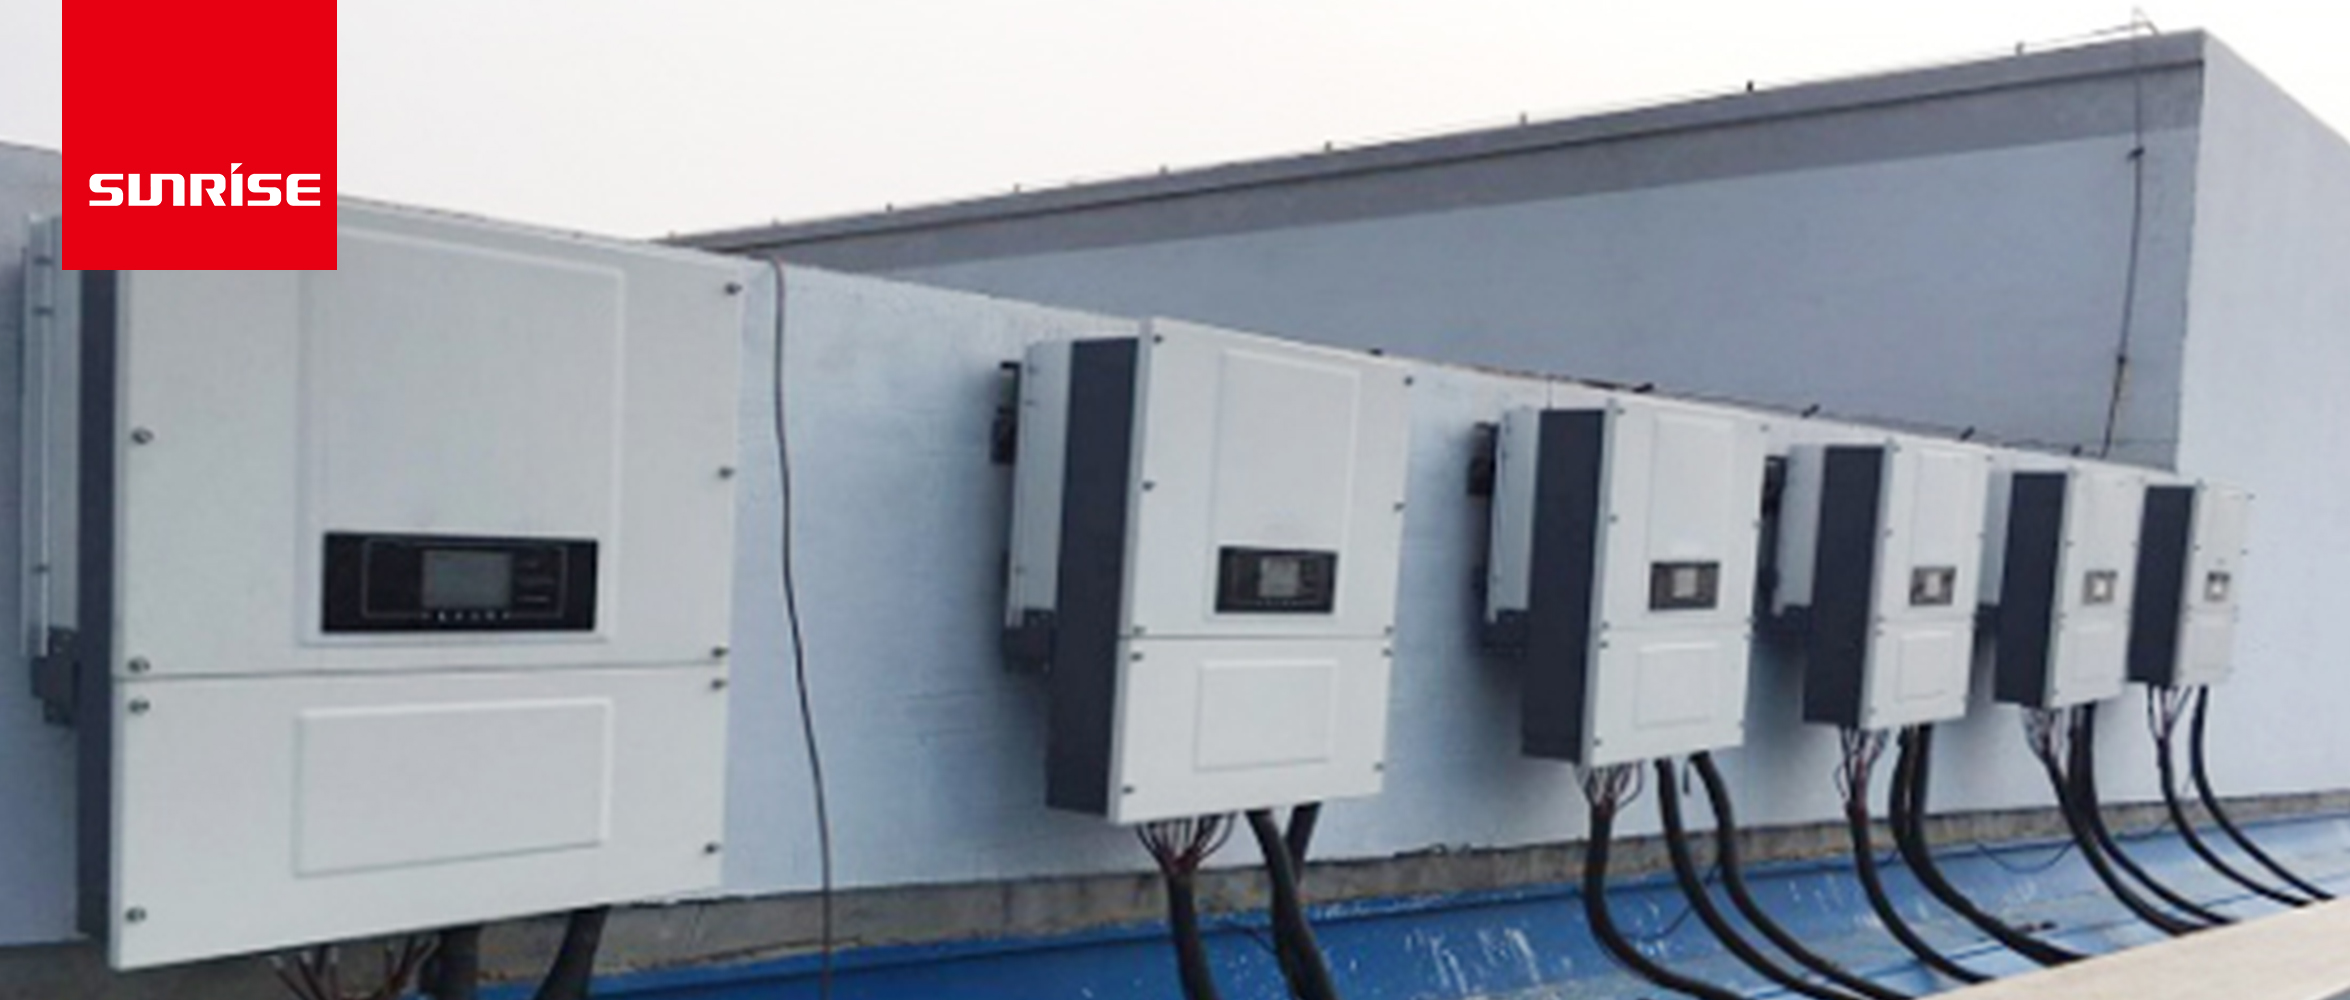 What Are the Basic Requirements of Solar PV Energy System for PV Inverters?